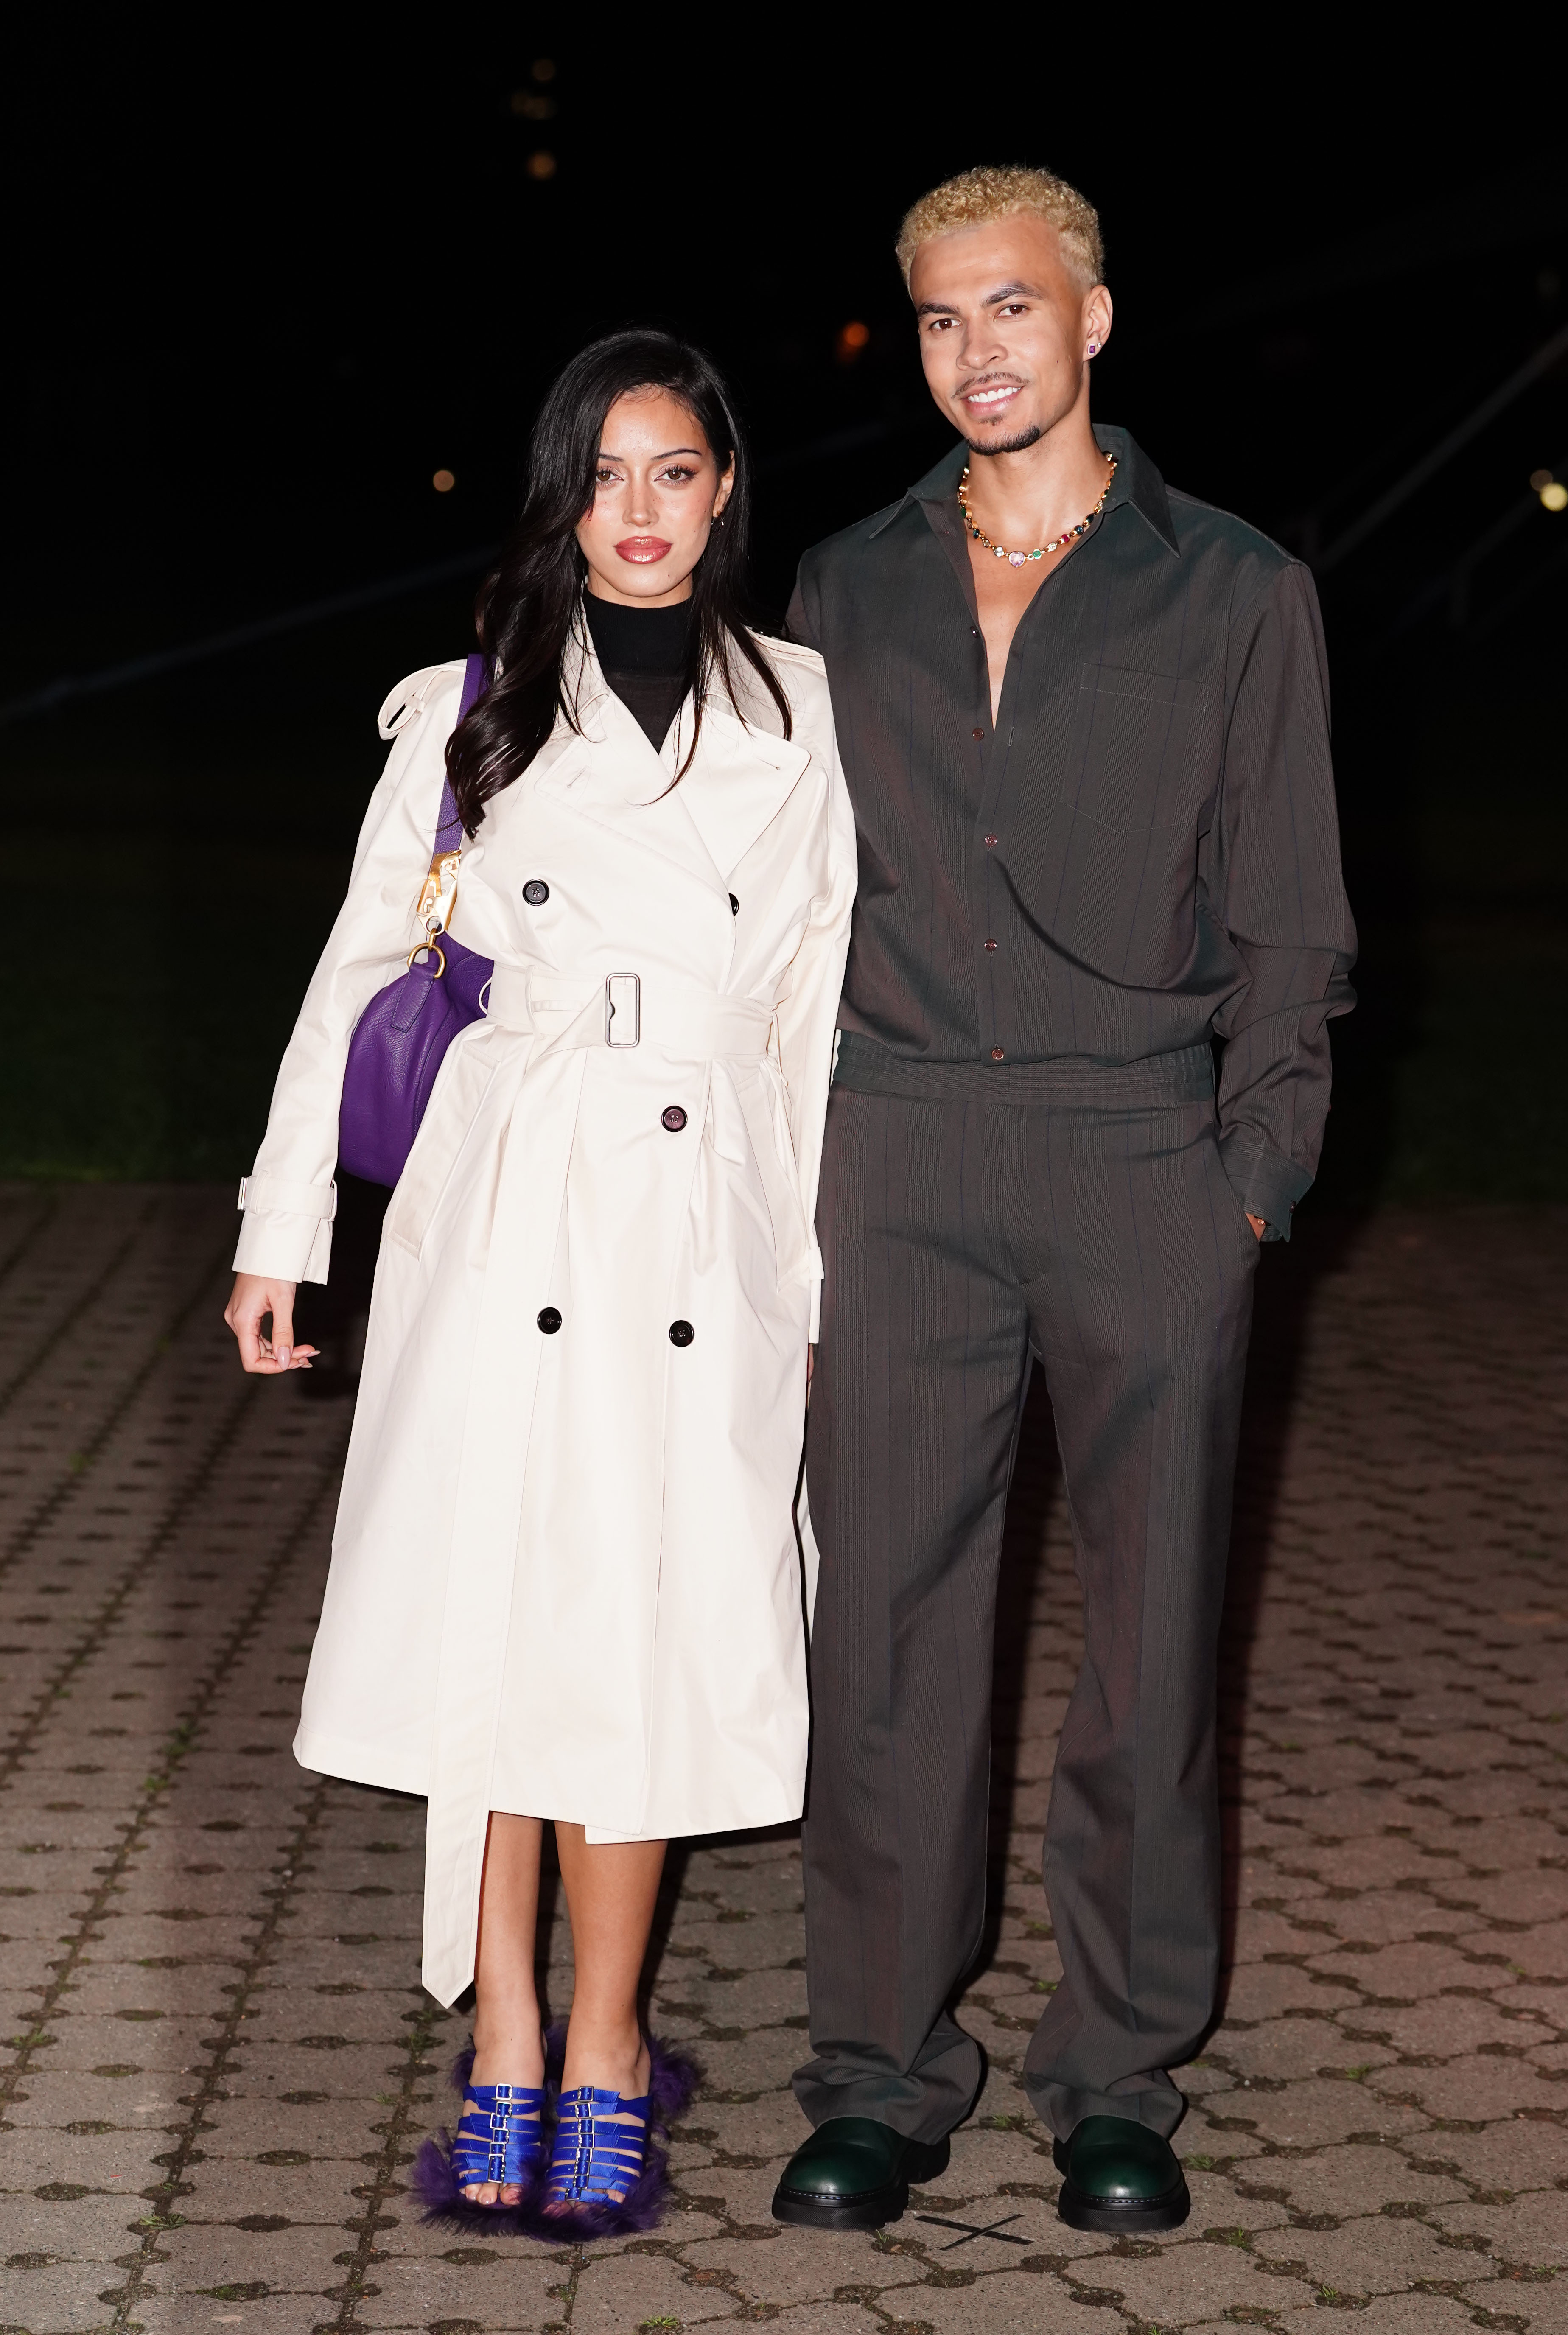 Dele Alli attended the event alongside girlfriend Cindy Kimberly